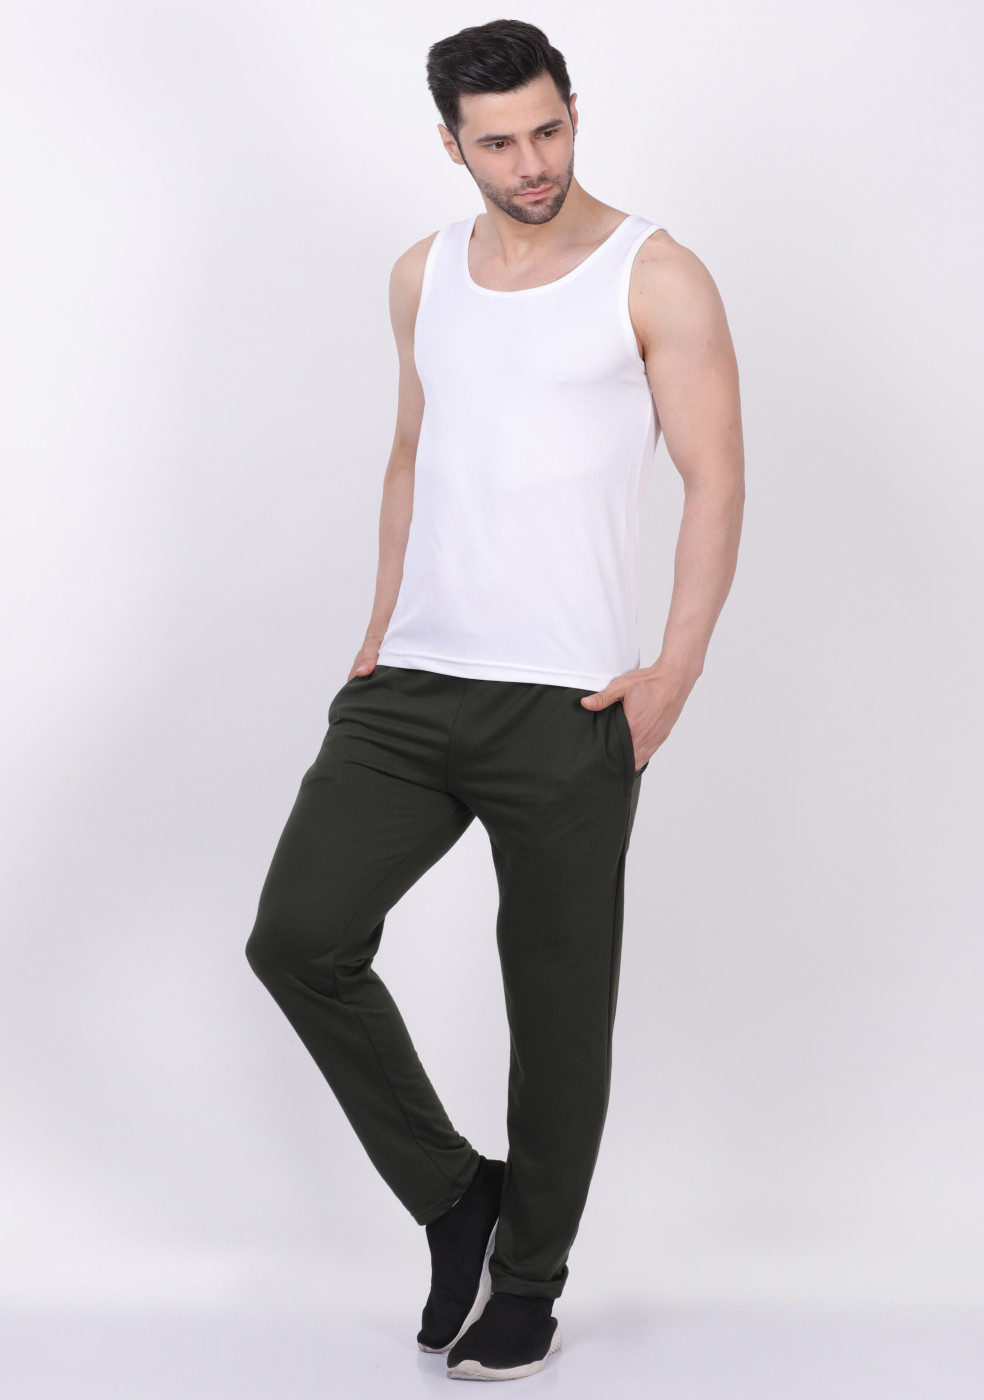 HUKH Green Casual Terry Sport wear Jagger For Men